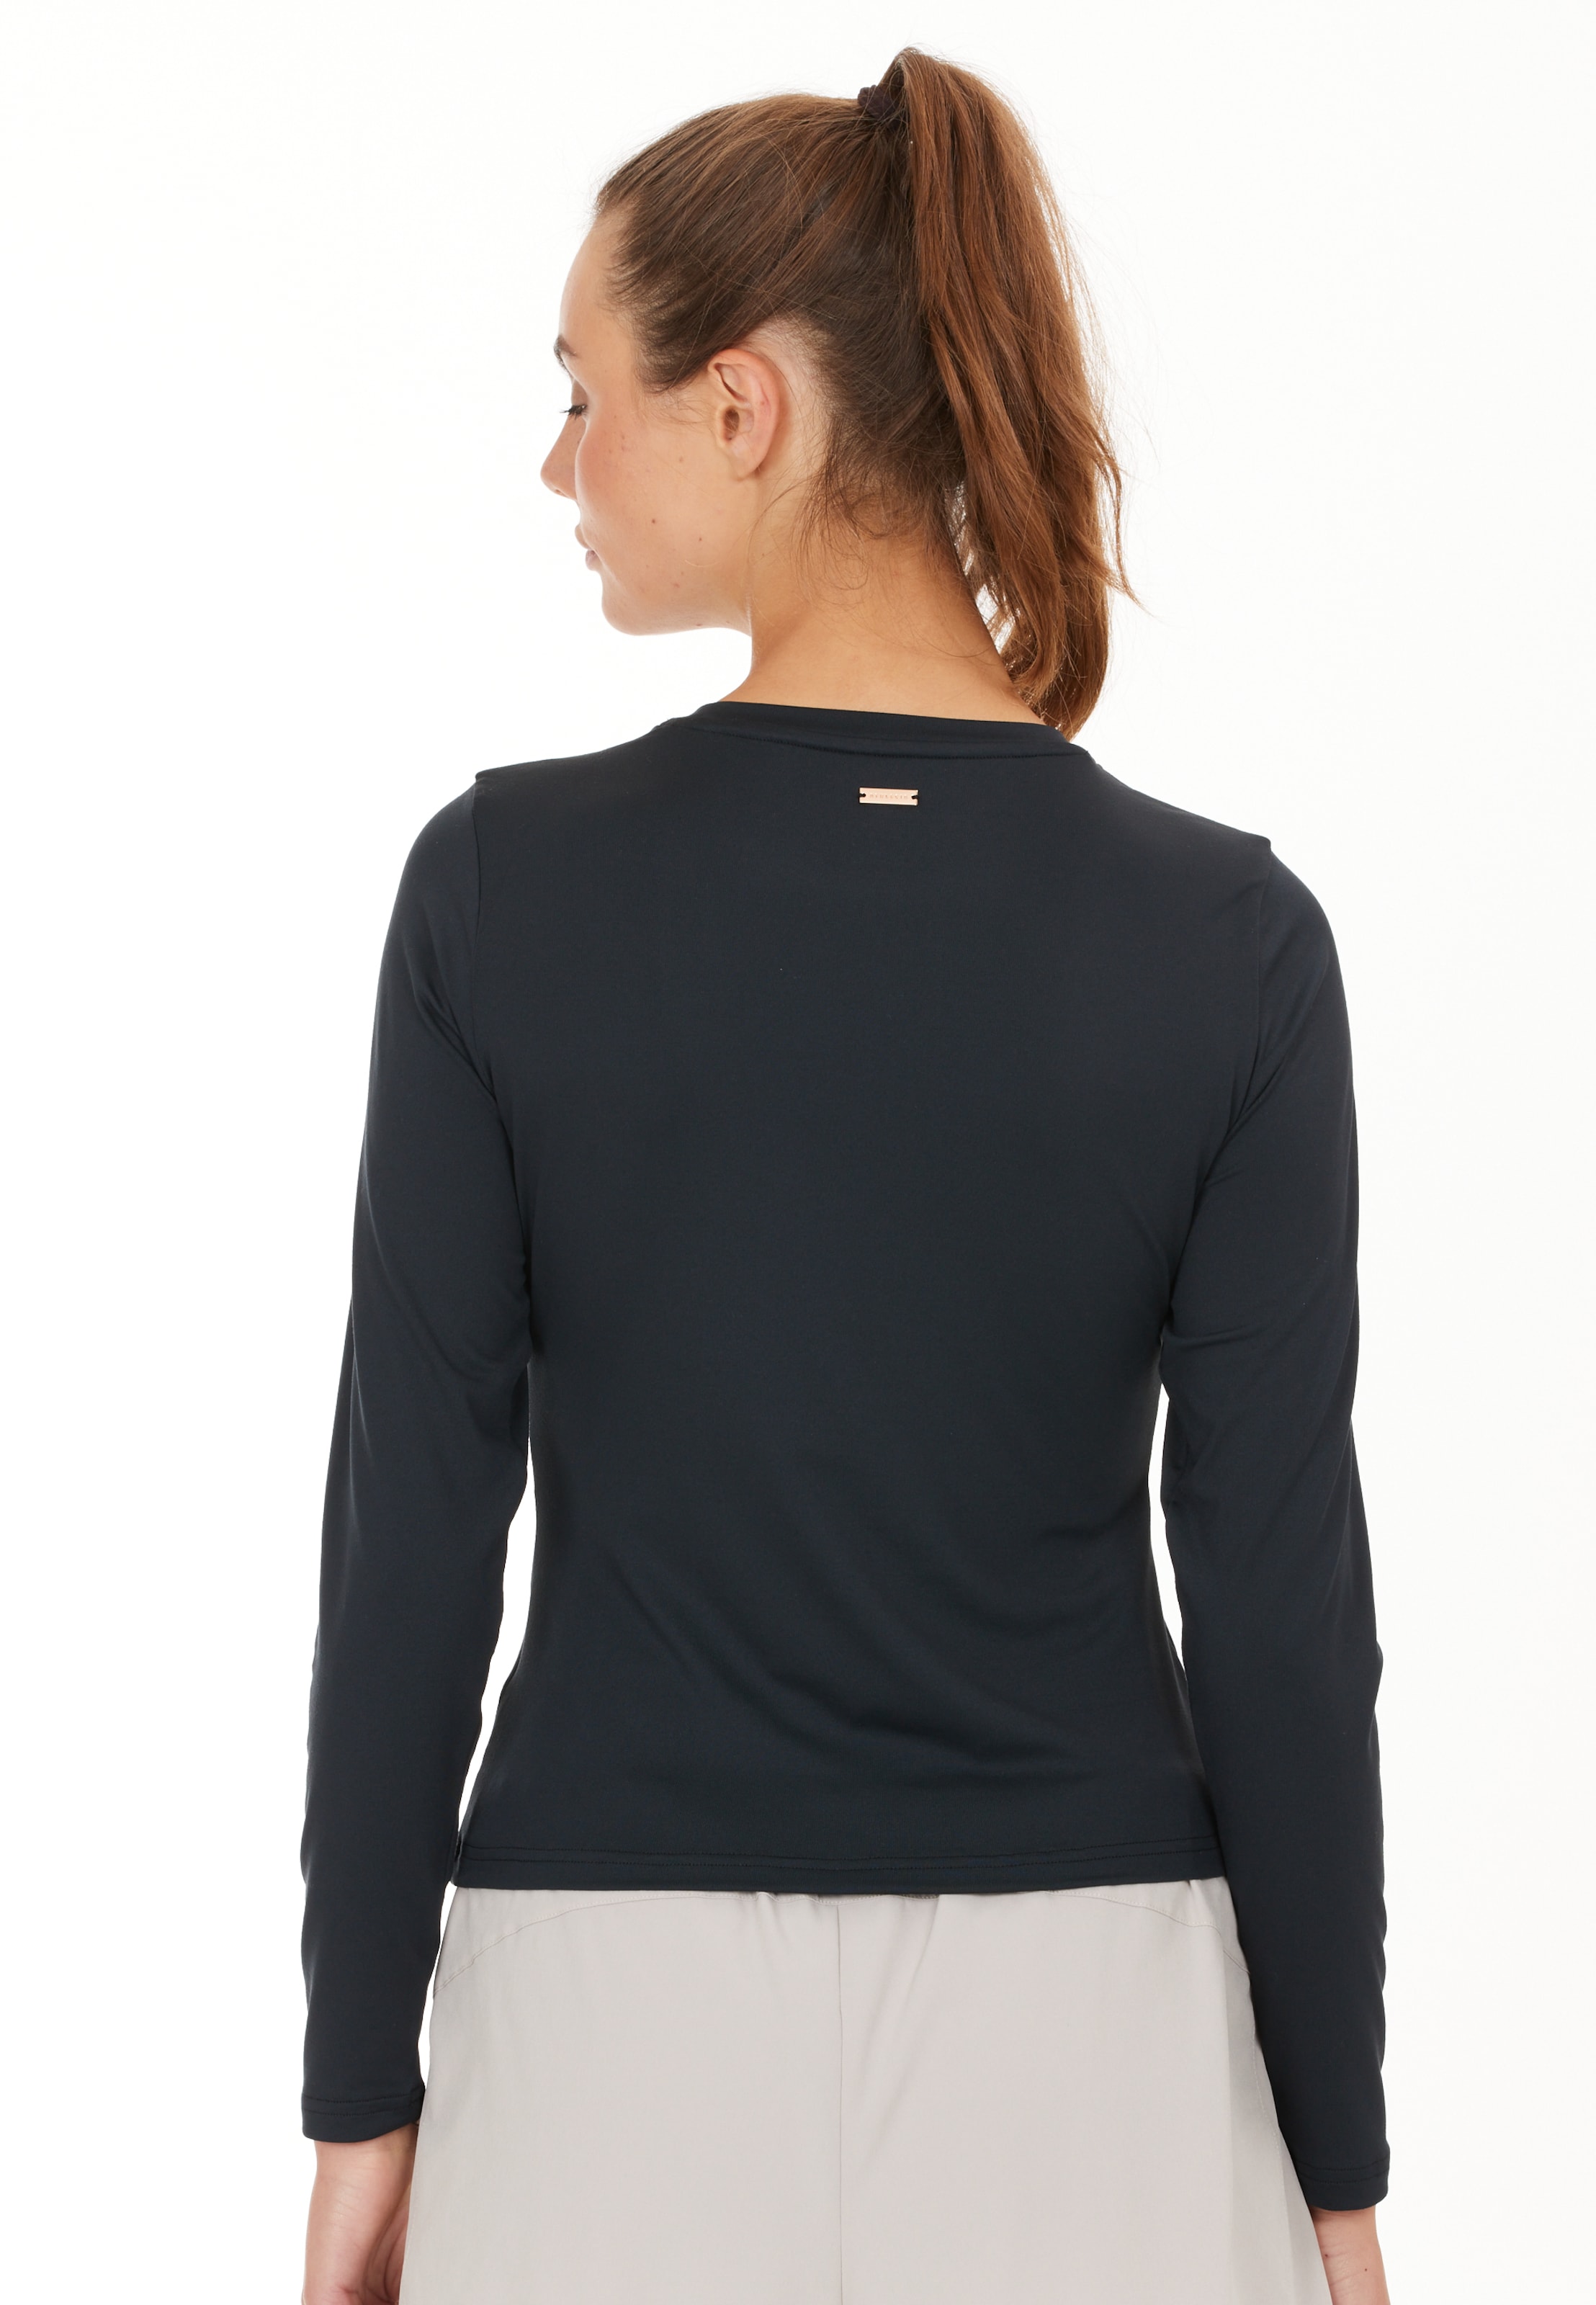 Athlecia Funktionsshirt 'Almi' in Schwarz | ABOUT YOU